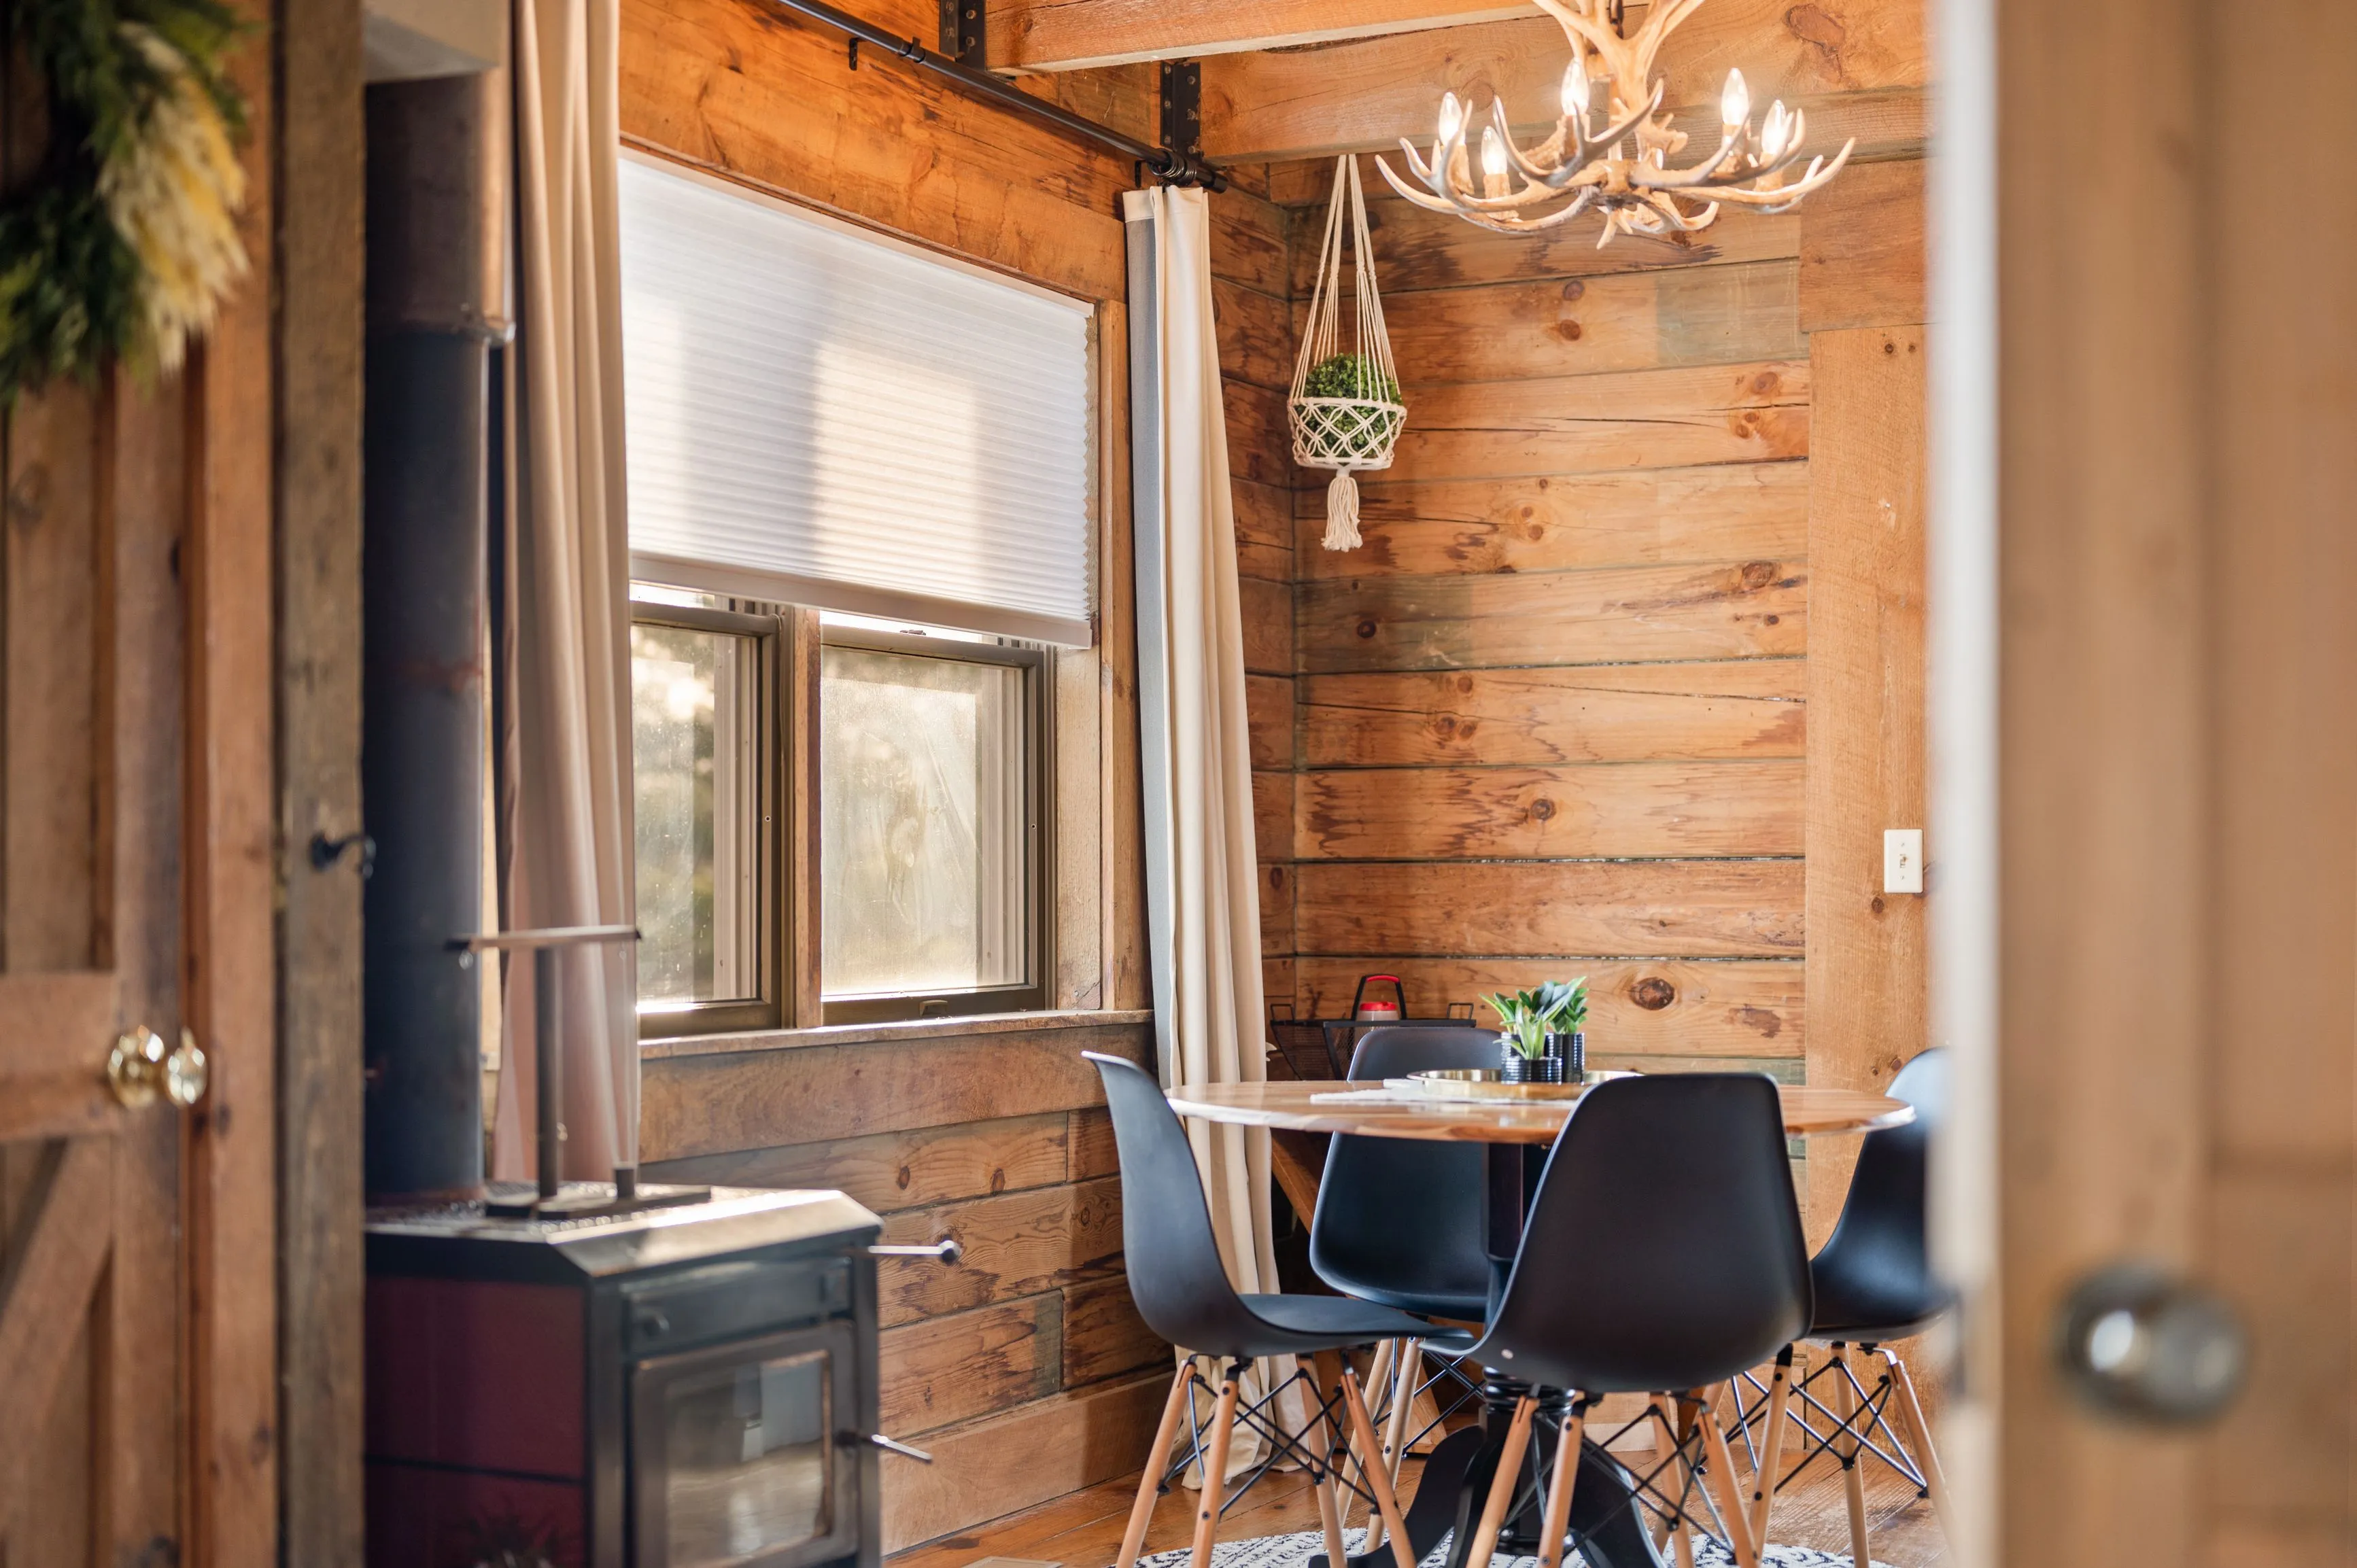 Cozy cabin interior with wooden walls, a small dining table and chairs, antler chandelier, and a wood-burning stove.